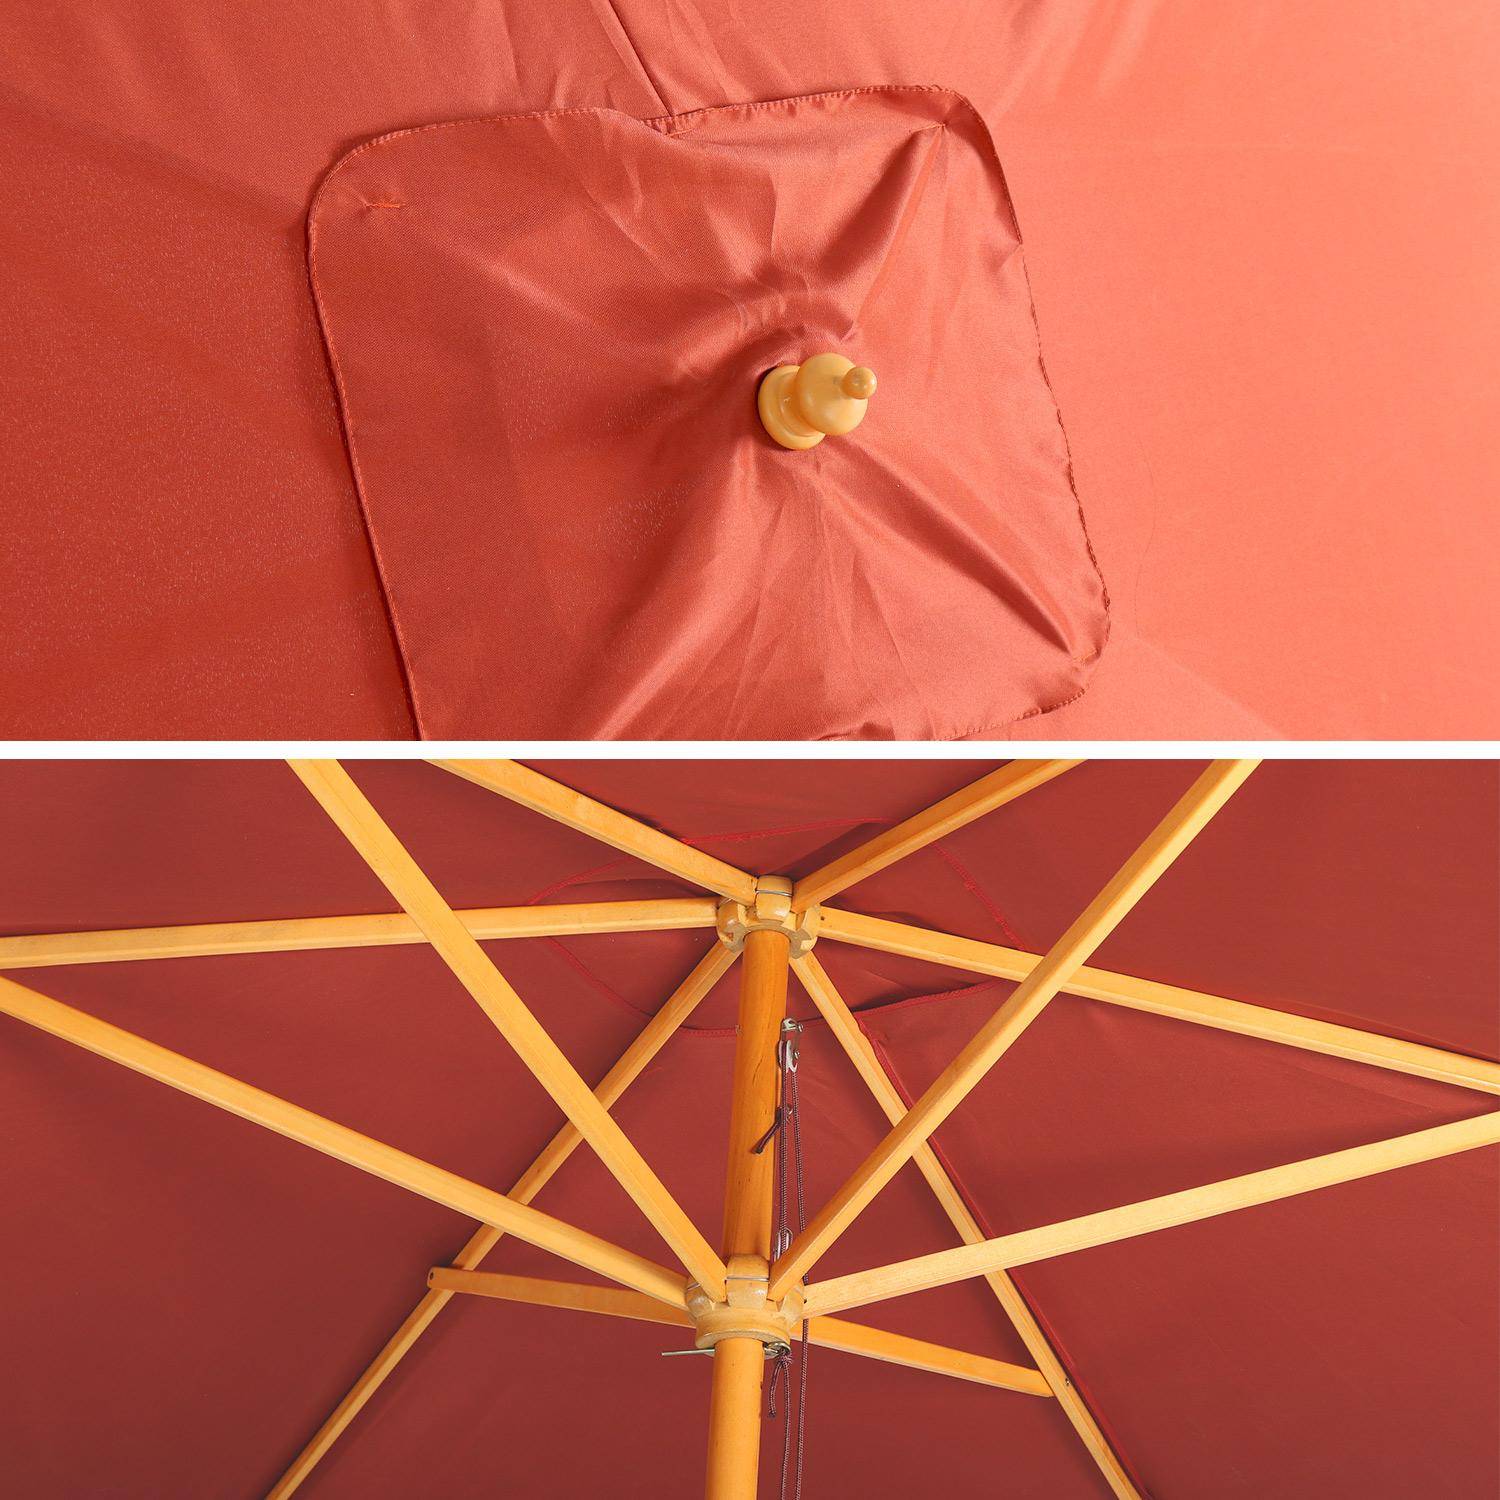 Straight rectangular wooden parasol 2x3m - adjustable central mast in wood and hand pulley opening - Cabourg - Terracotta Photo4